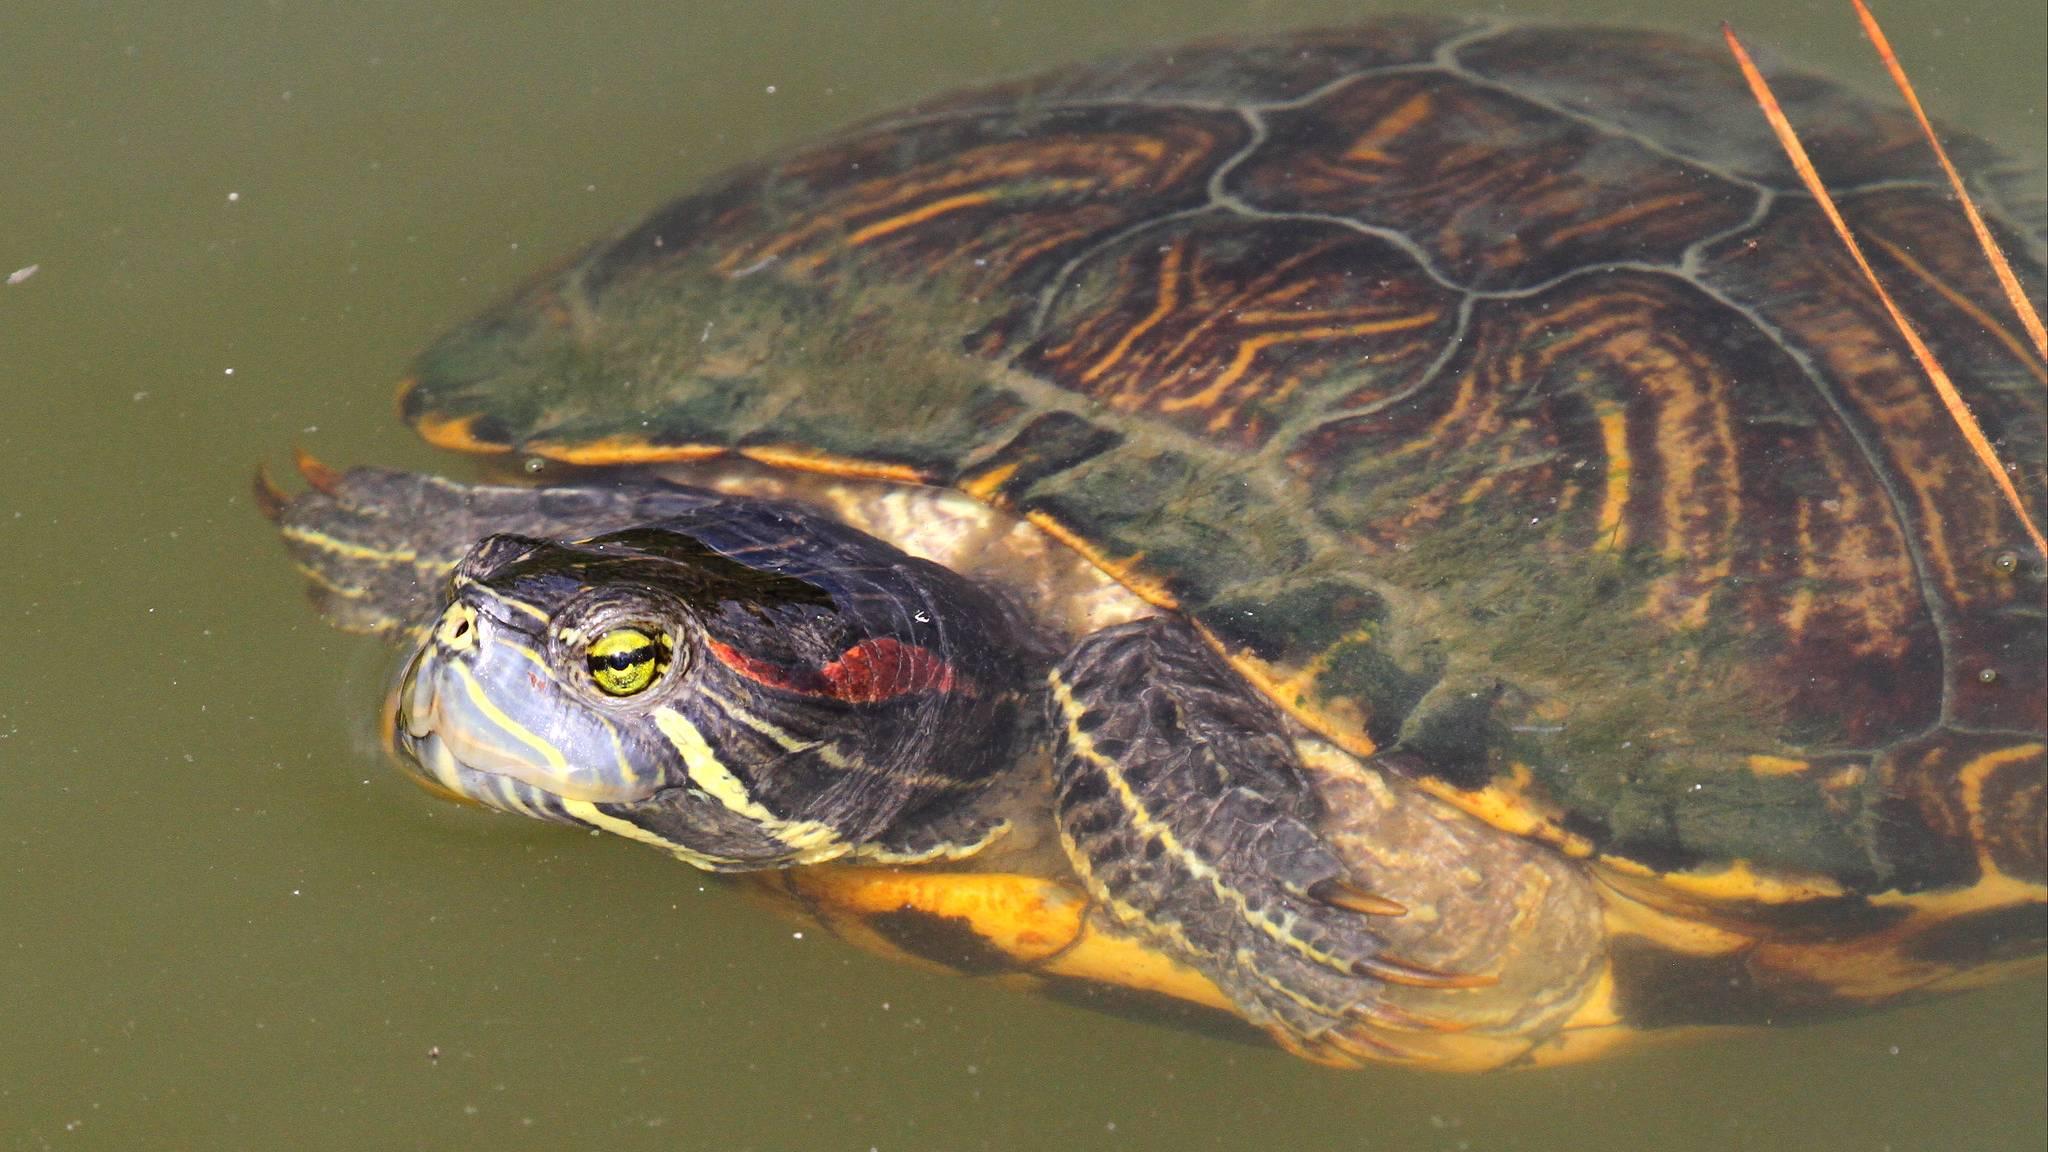 The red-eared slider turtle is on international "least wanted" lists. (abbeyprivate / Flickr Creative Commons)